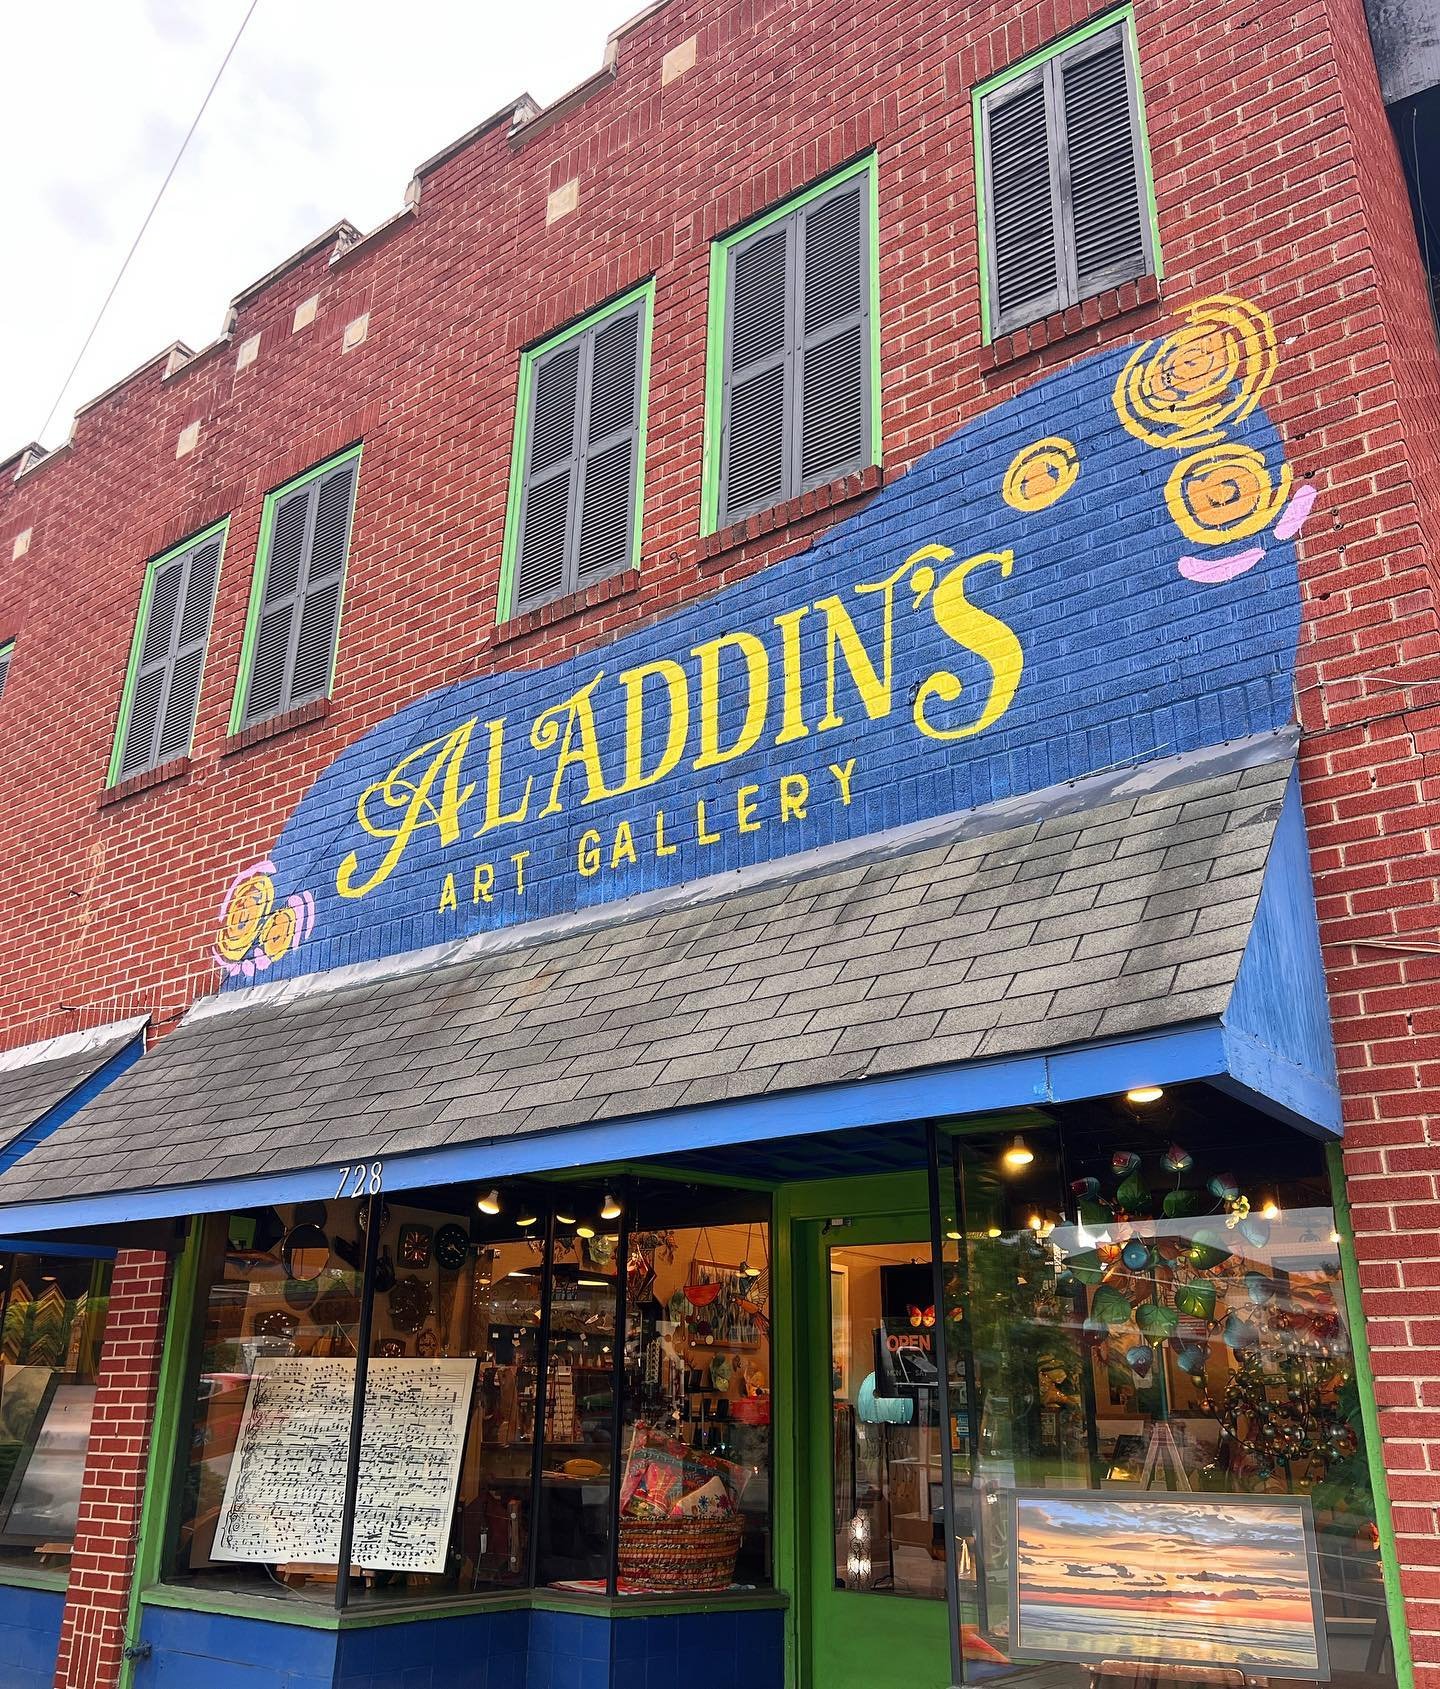 I saw the siiign 🎶 Just completed this new sign at Aladdin&rsquo;s Art Gallery, our first client to go through all 3 services of custom murals, brand design and sign painting!

The owner, Mary, loved what we did with her business name in our custom 